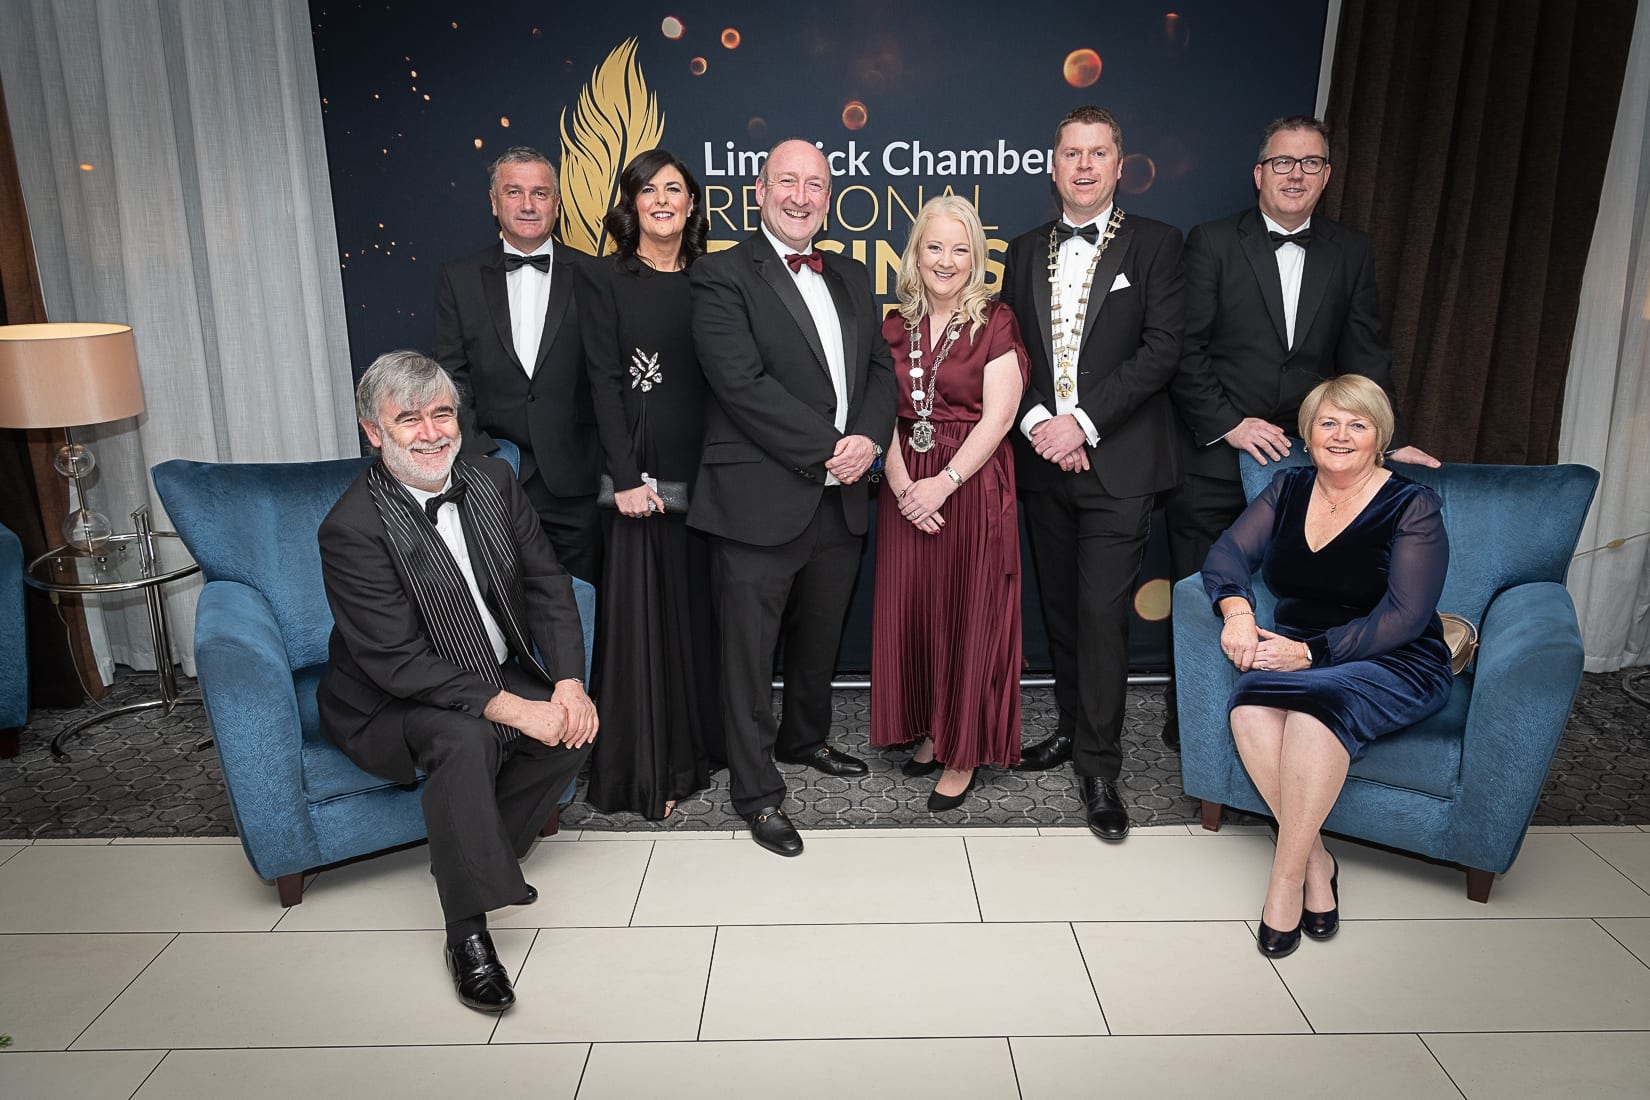 No repro fee-Limerick Chamber President’s Dinner
and Limerick Chamber Regional Business Awards 2019 which was held in the Strand Hotel on Friday 15th November /  Limerick Council  Sponsors/  - From Left to Right: Kieran Lahane, Pat Fitzgerald, Mary and Pat Daly, Deputy Mayor Sarah Kiely, Eoin Ryan - President Limerick Chamber, 
Vincent Murray and Deirdre Moloney all from Limerick Council.  Photo credit Shauna Kennedy